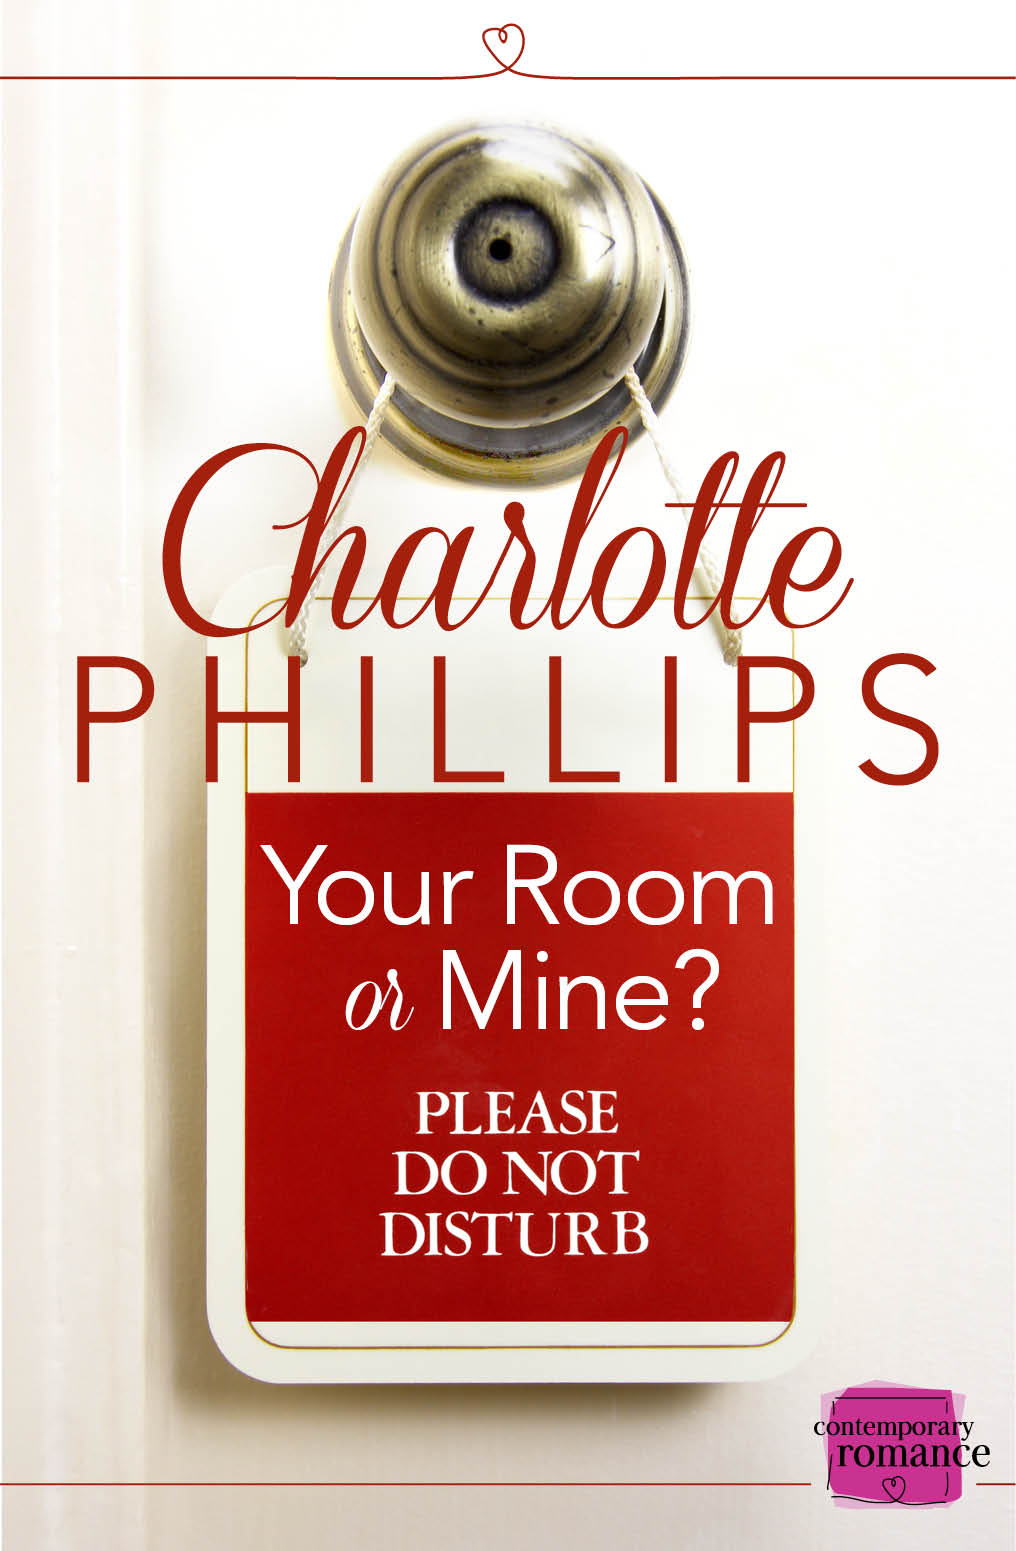 Your Room or Mine? by Charlotte Phillips